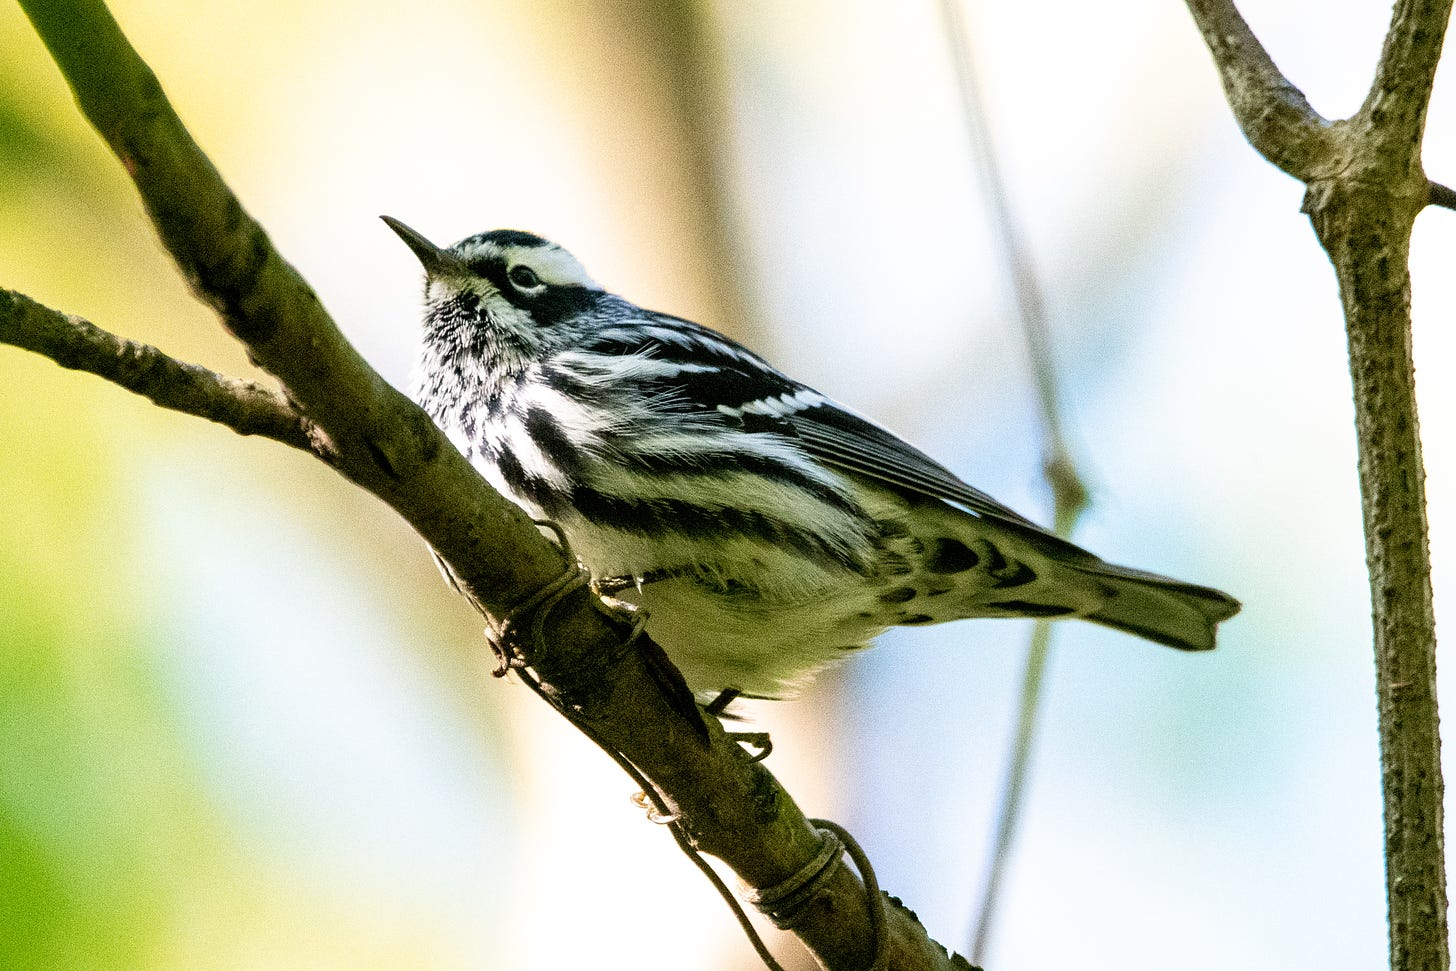 A black-and-white warbler perched on a bare branch